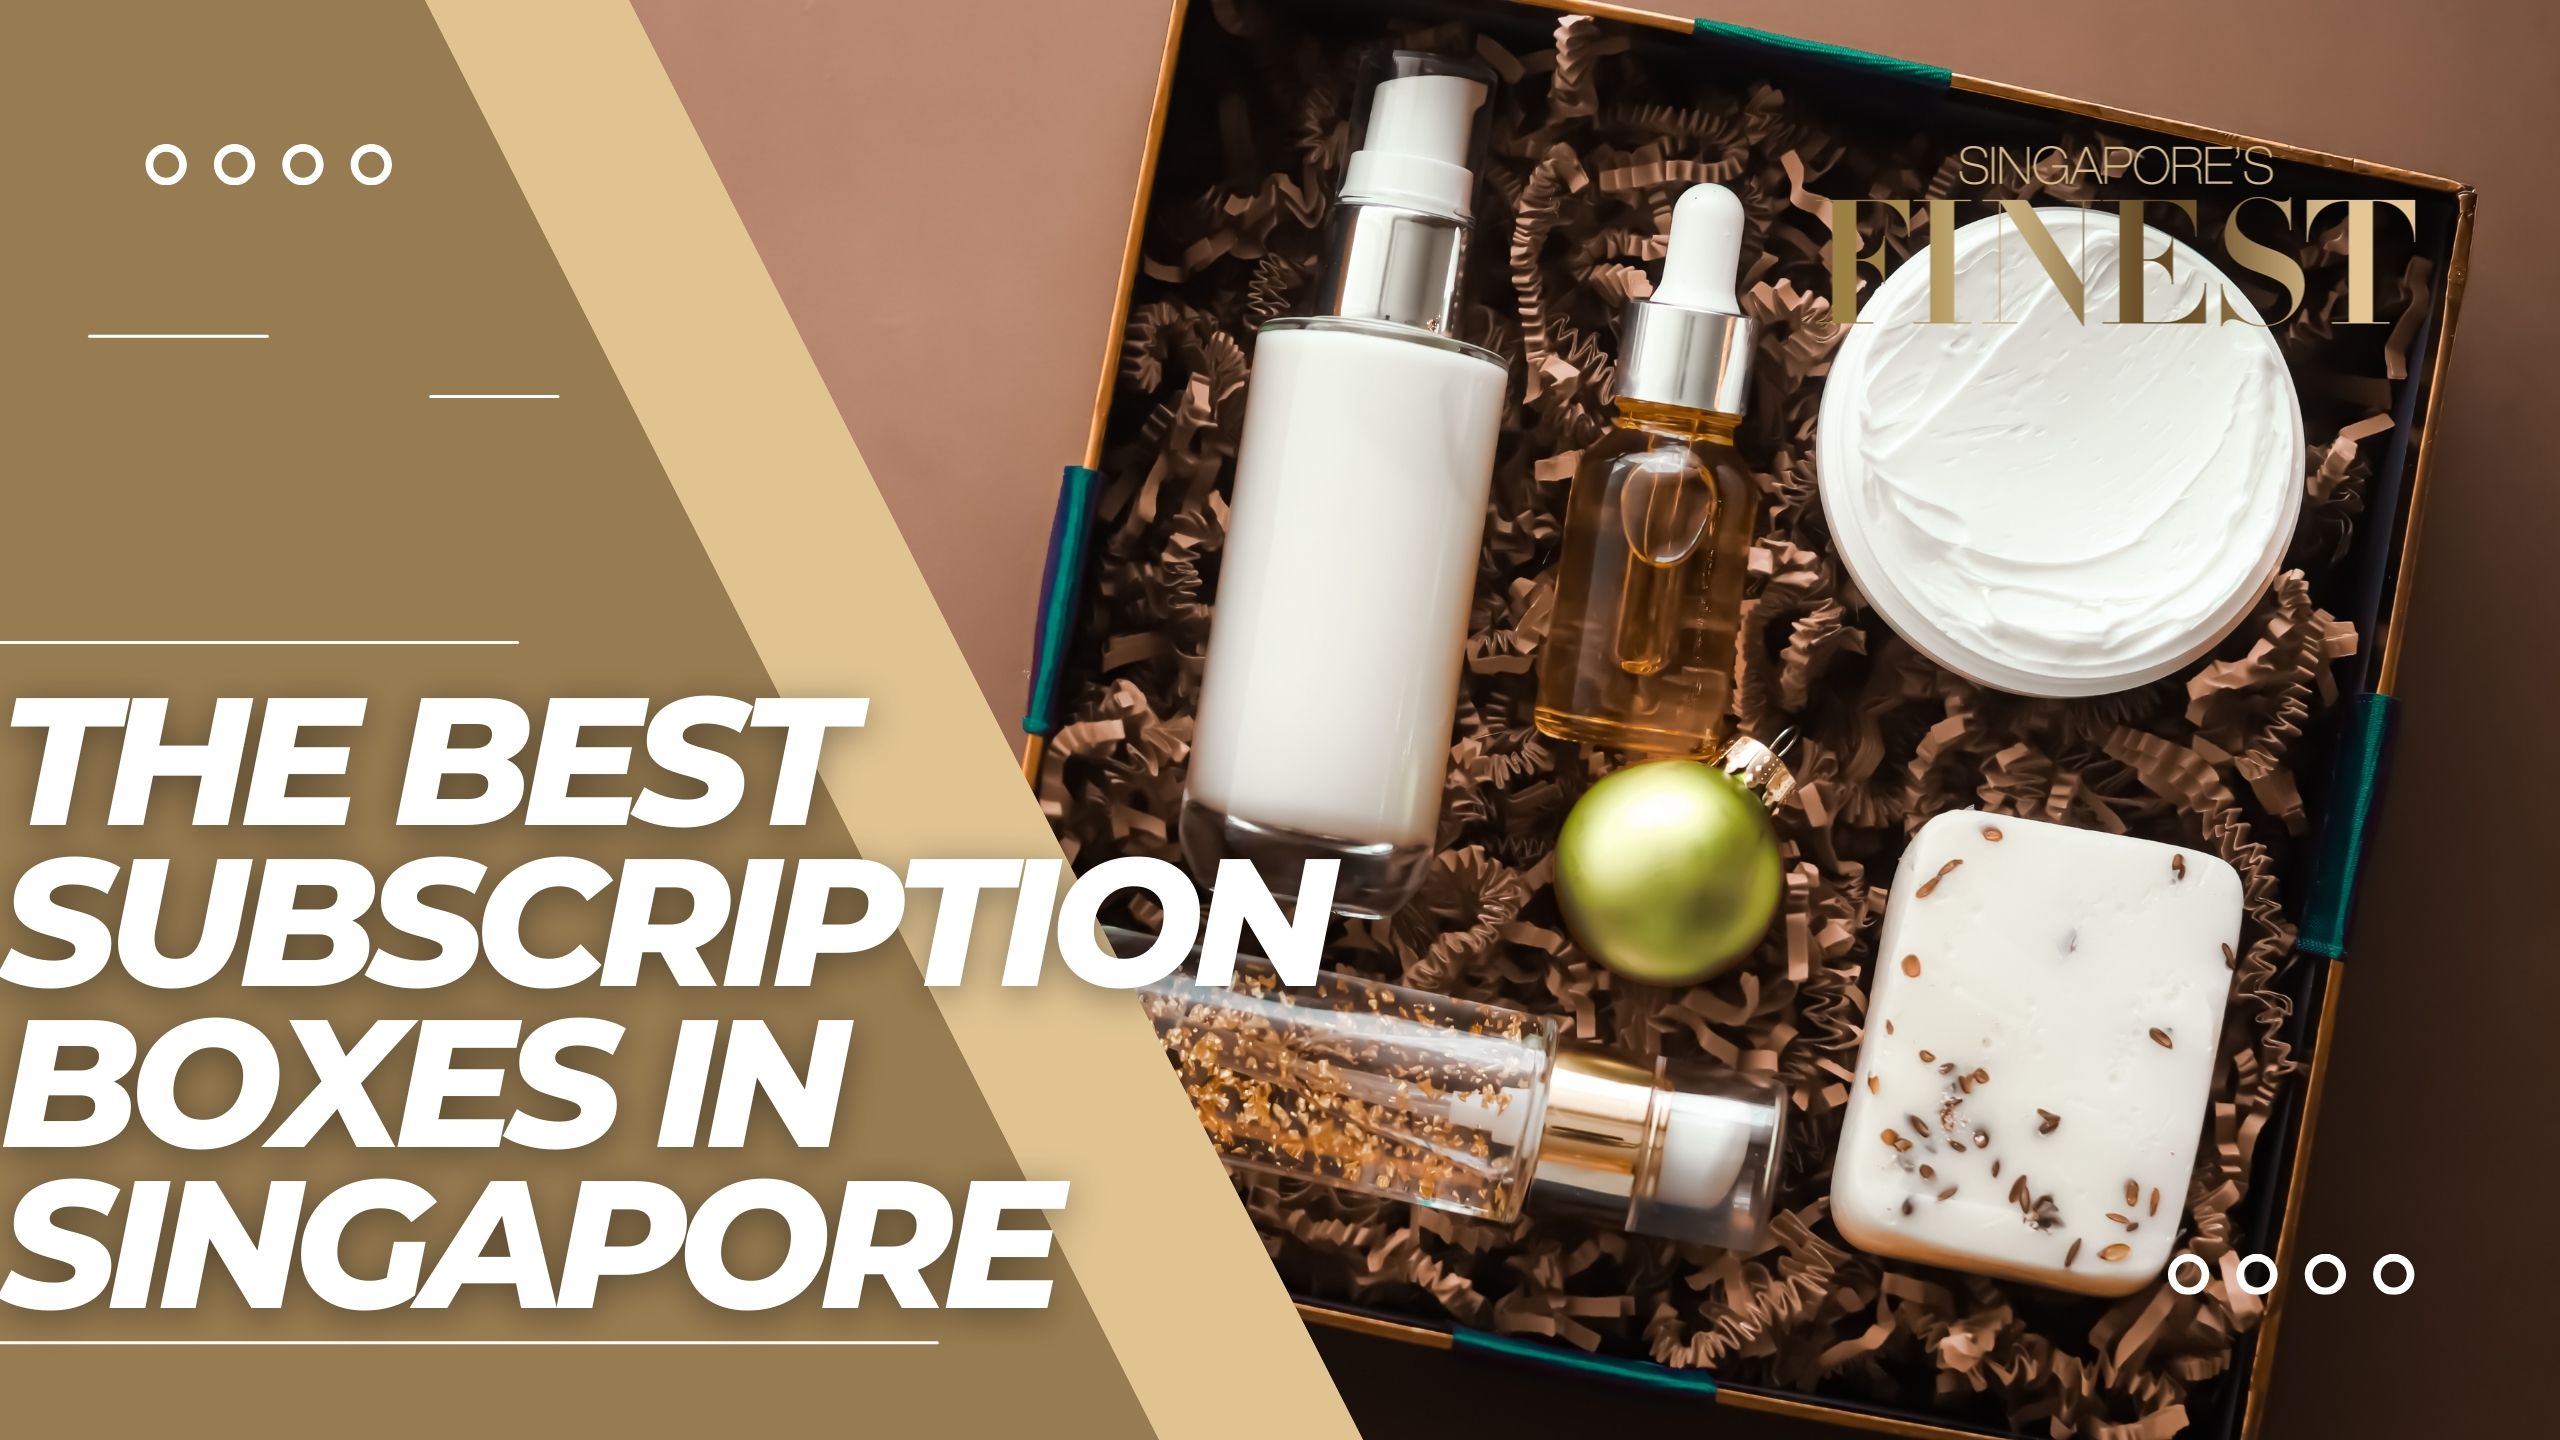 The Finest Subscription Boxes in Singapore